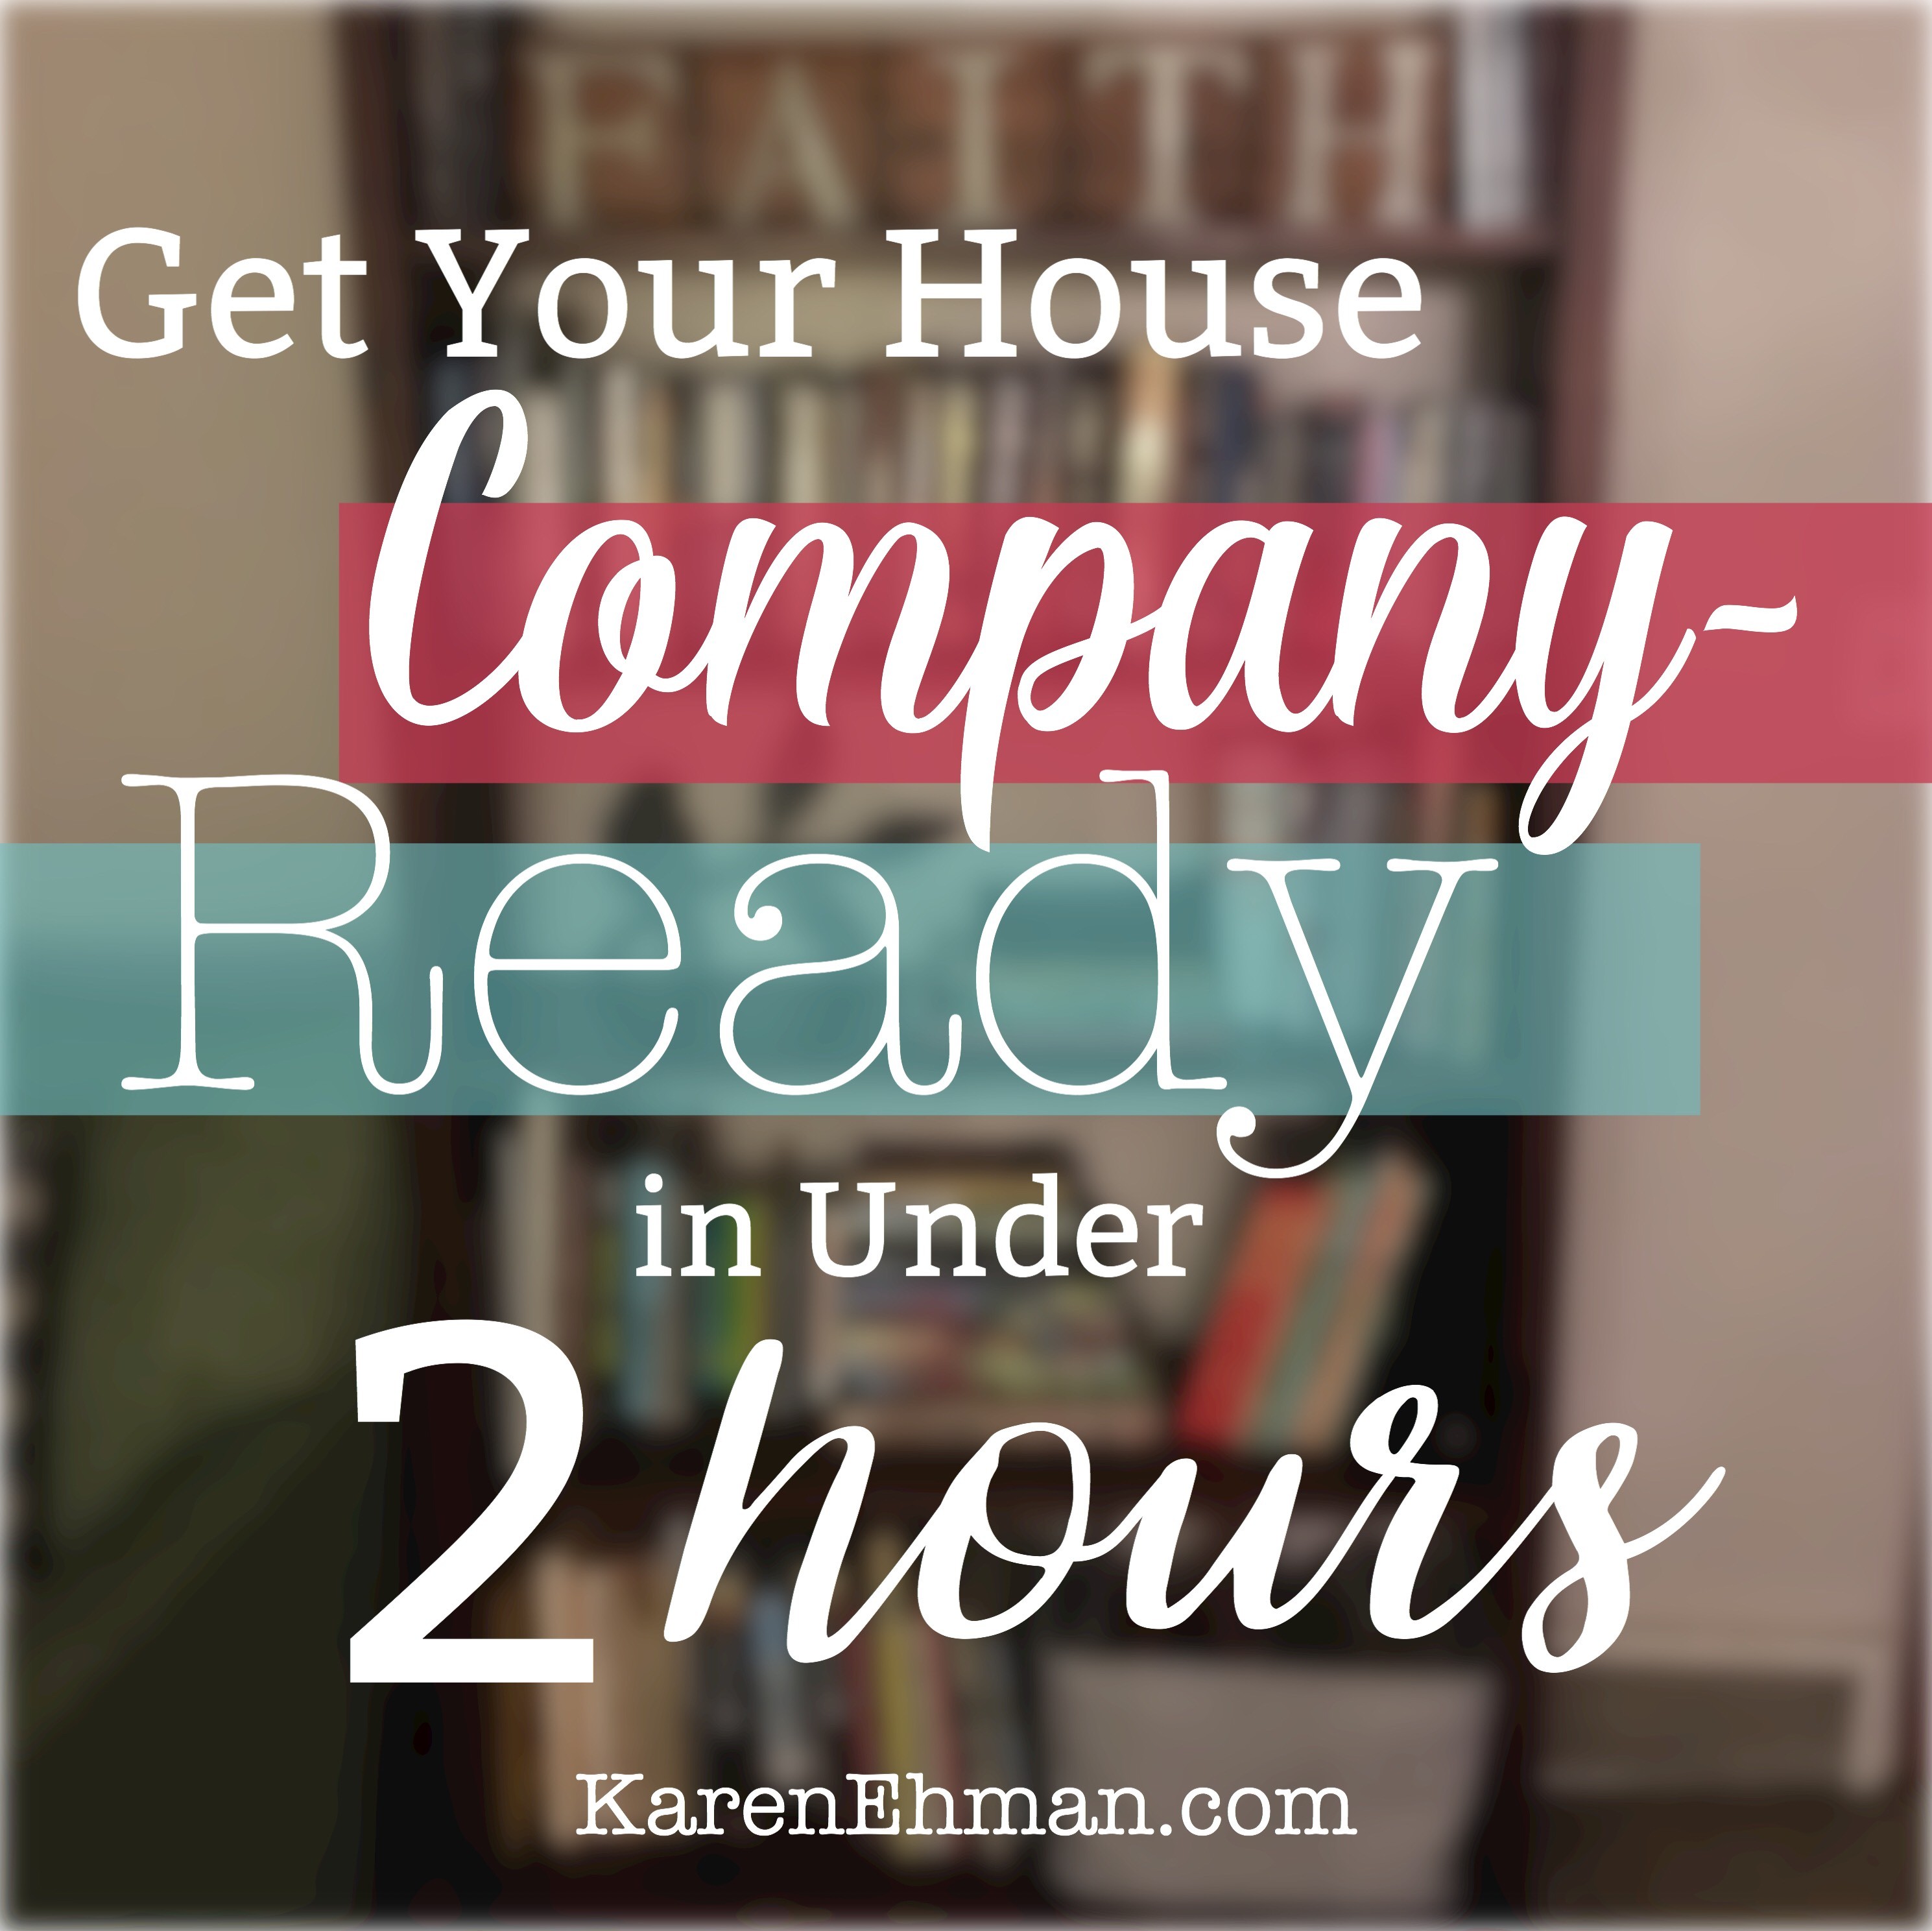 Get Your House Company-Ready in Under 2 Hours with Crystal Paine at KarenEhman.com